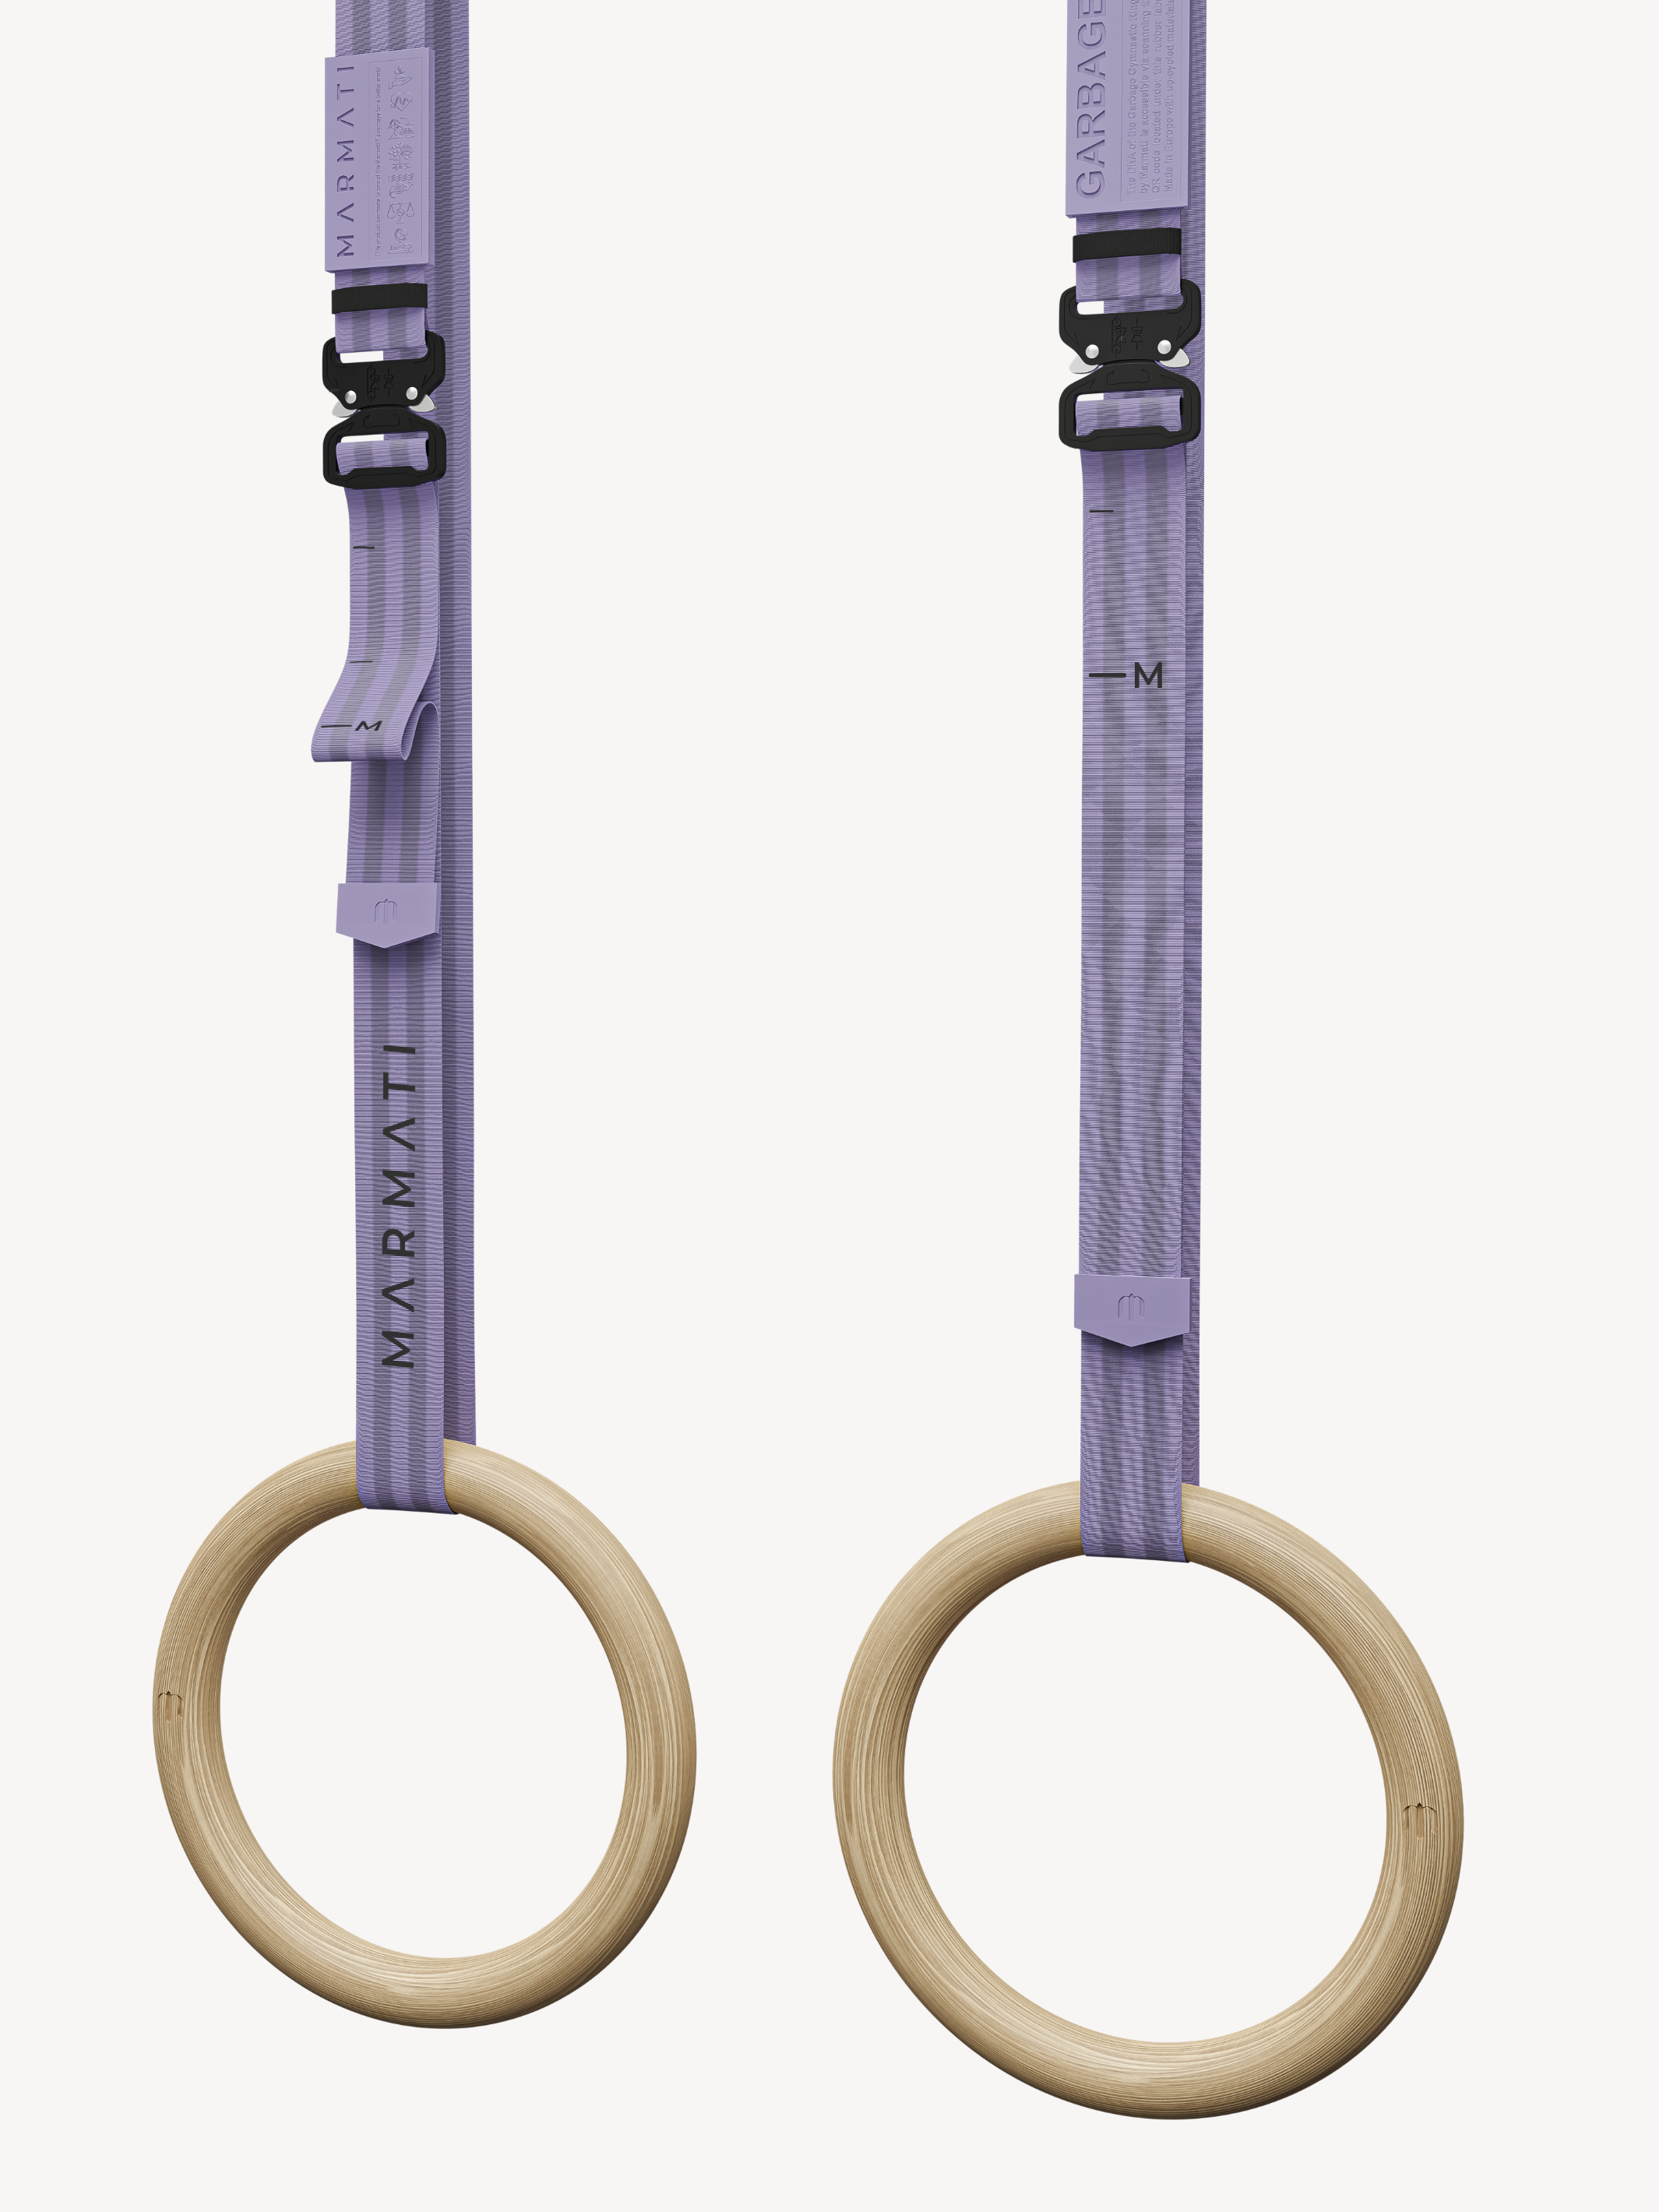 Constructed from recycled materials with high-performance, gymnastic rings by Marmati ensure an adventurous performance that engages the body, mind, and soul. Made for the most demanding workouts off the ground. Journey 5 edition is providing Superior Education in collaboration with Pencils of Promise.